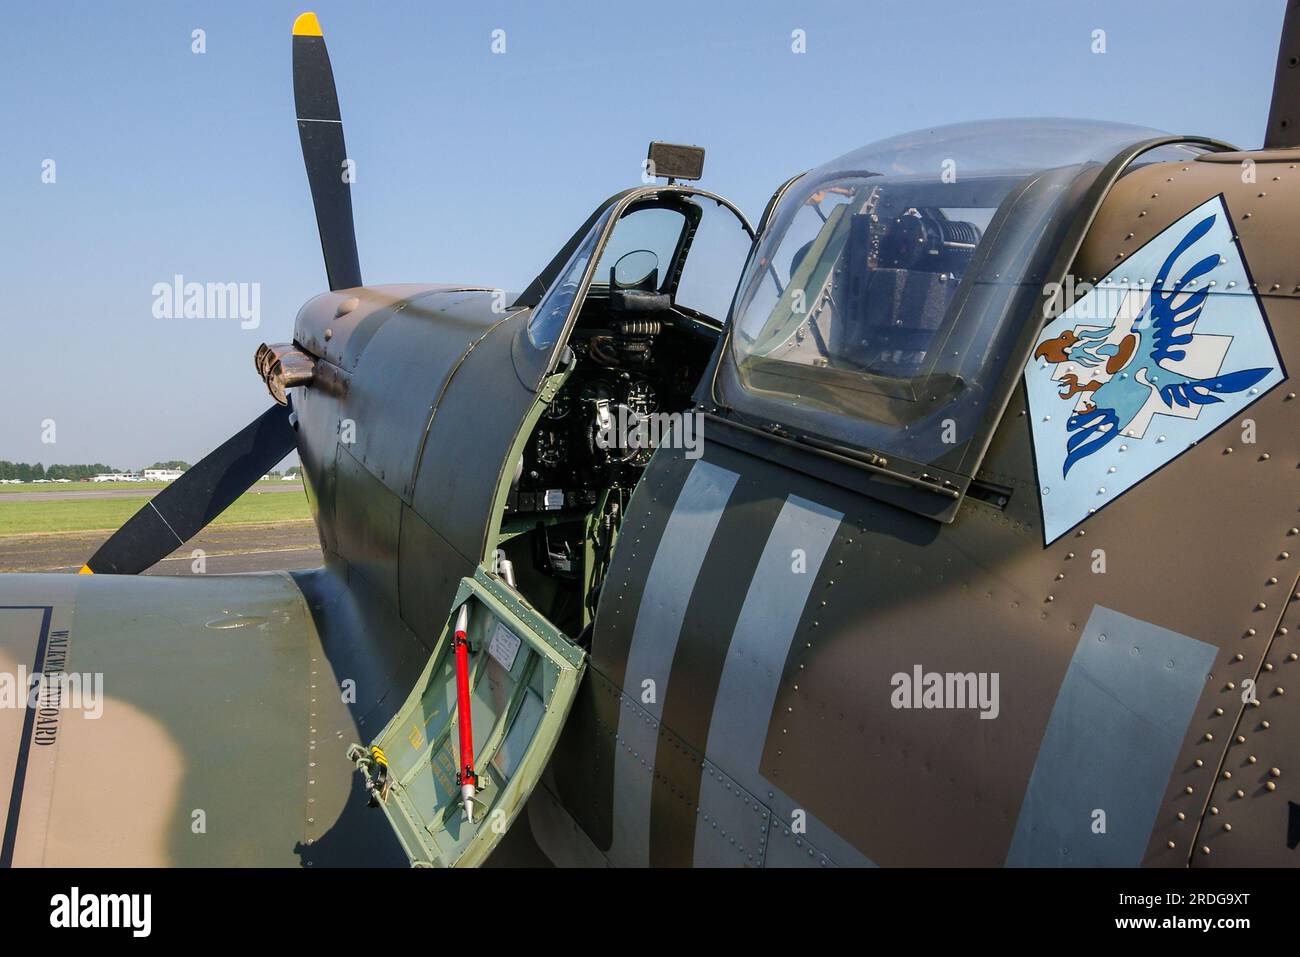 Cockpit of Second World War Spitfire V fighter plane BM597 of Historic Aircraft Collection. Emblem of No. 317 'City of Wilno' Polish Fighter Squadron Stock Photo